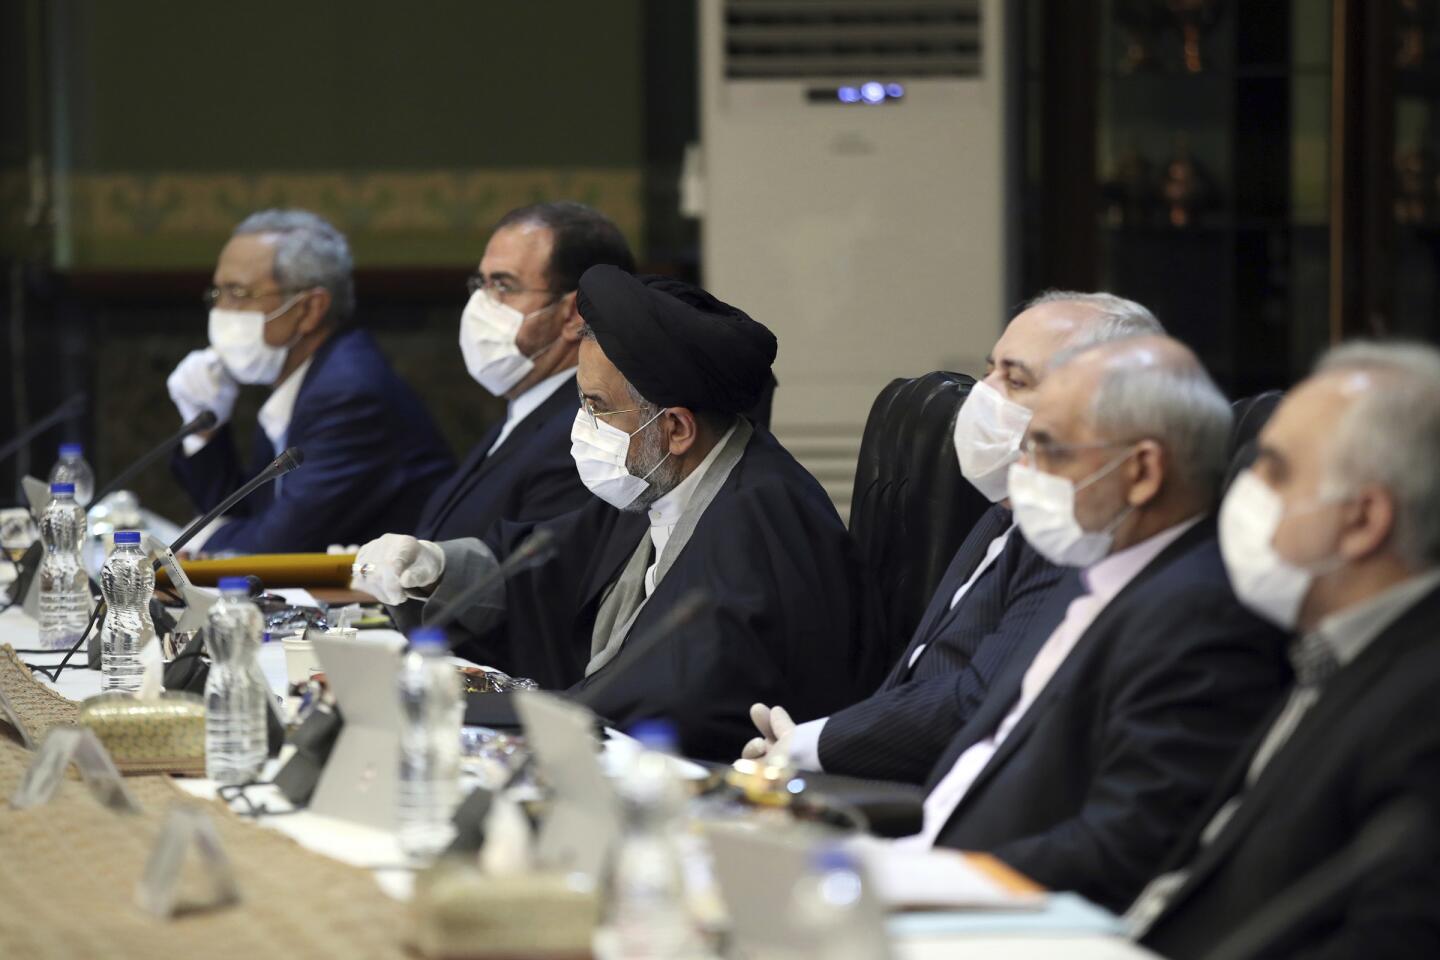 Iran: In the Office of the Iranian Presidency, Cabinet members wearing face masks and gloves attend their meeting in Tehran.